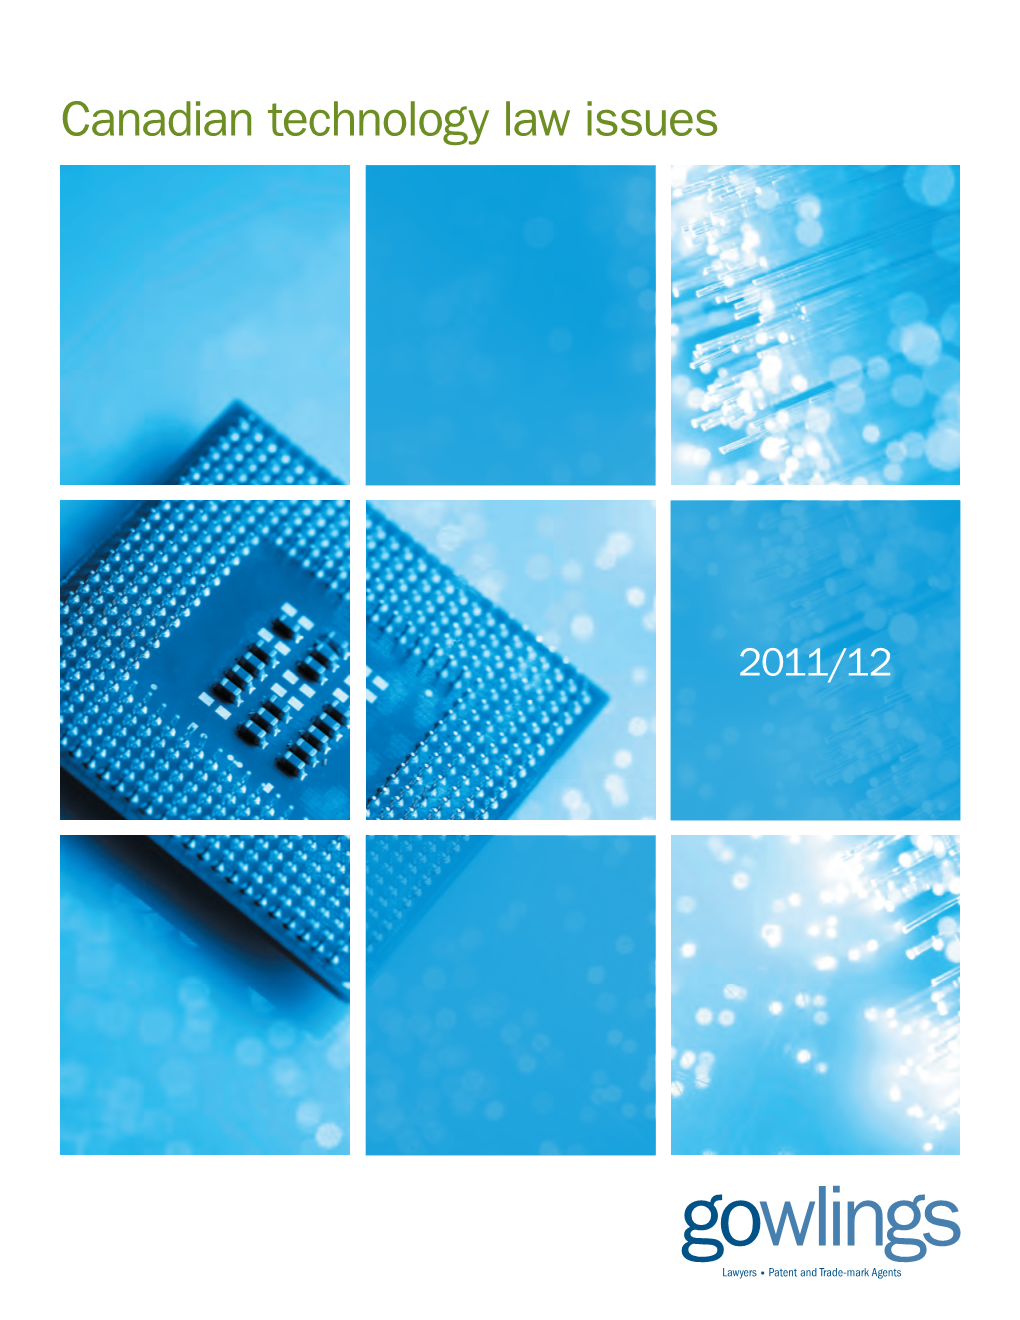 Canadian Technology Law Issues 2011/12 Table of Contents